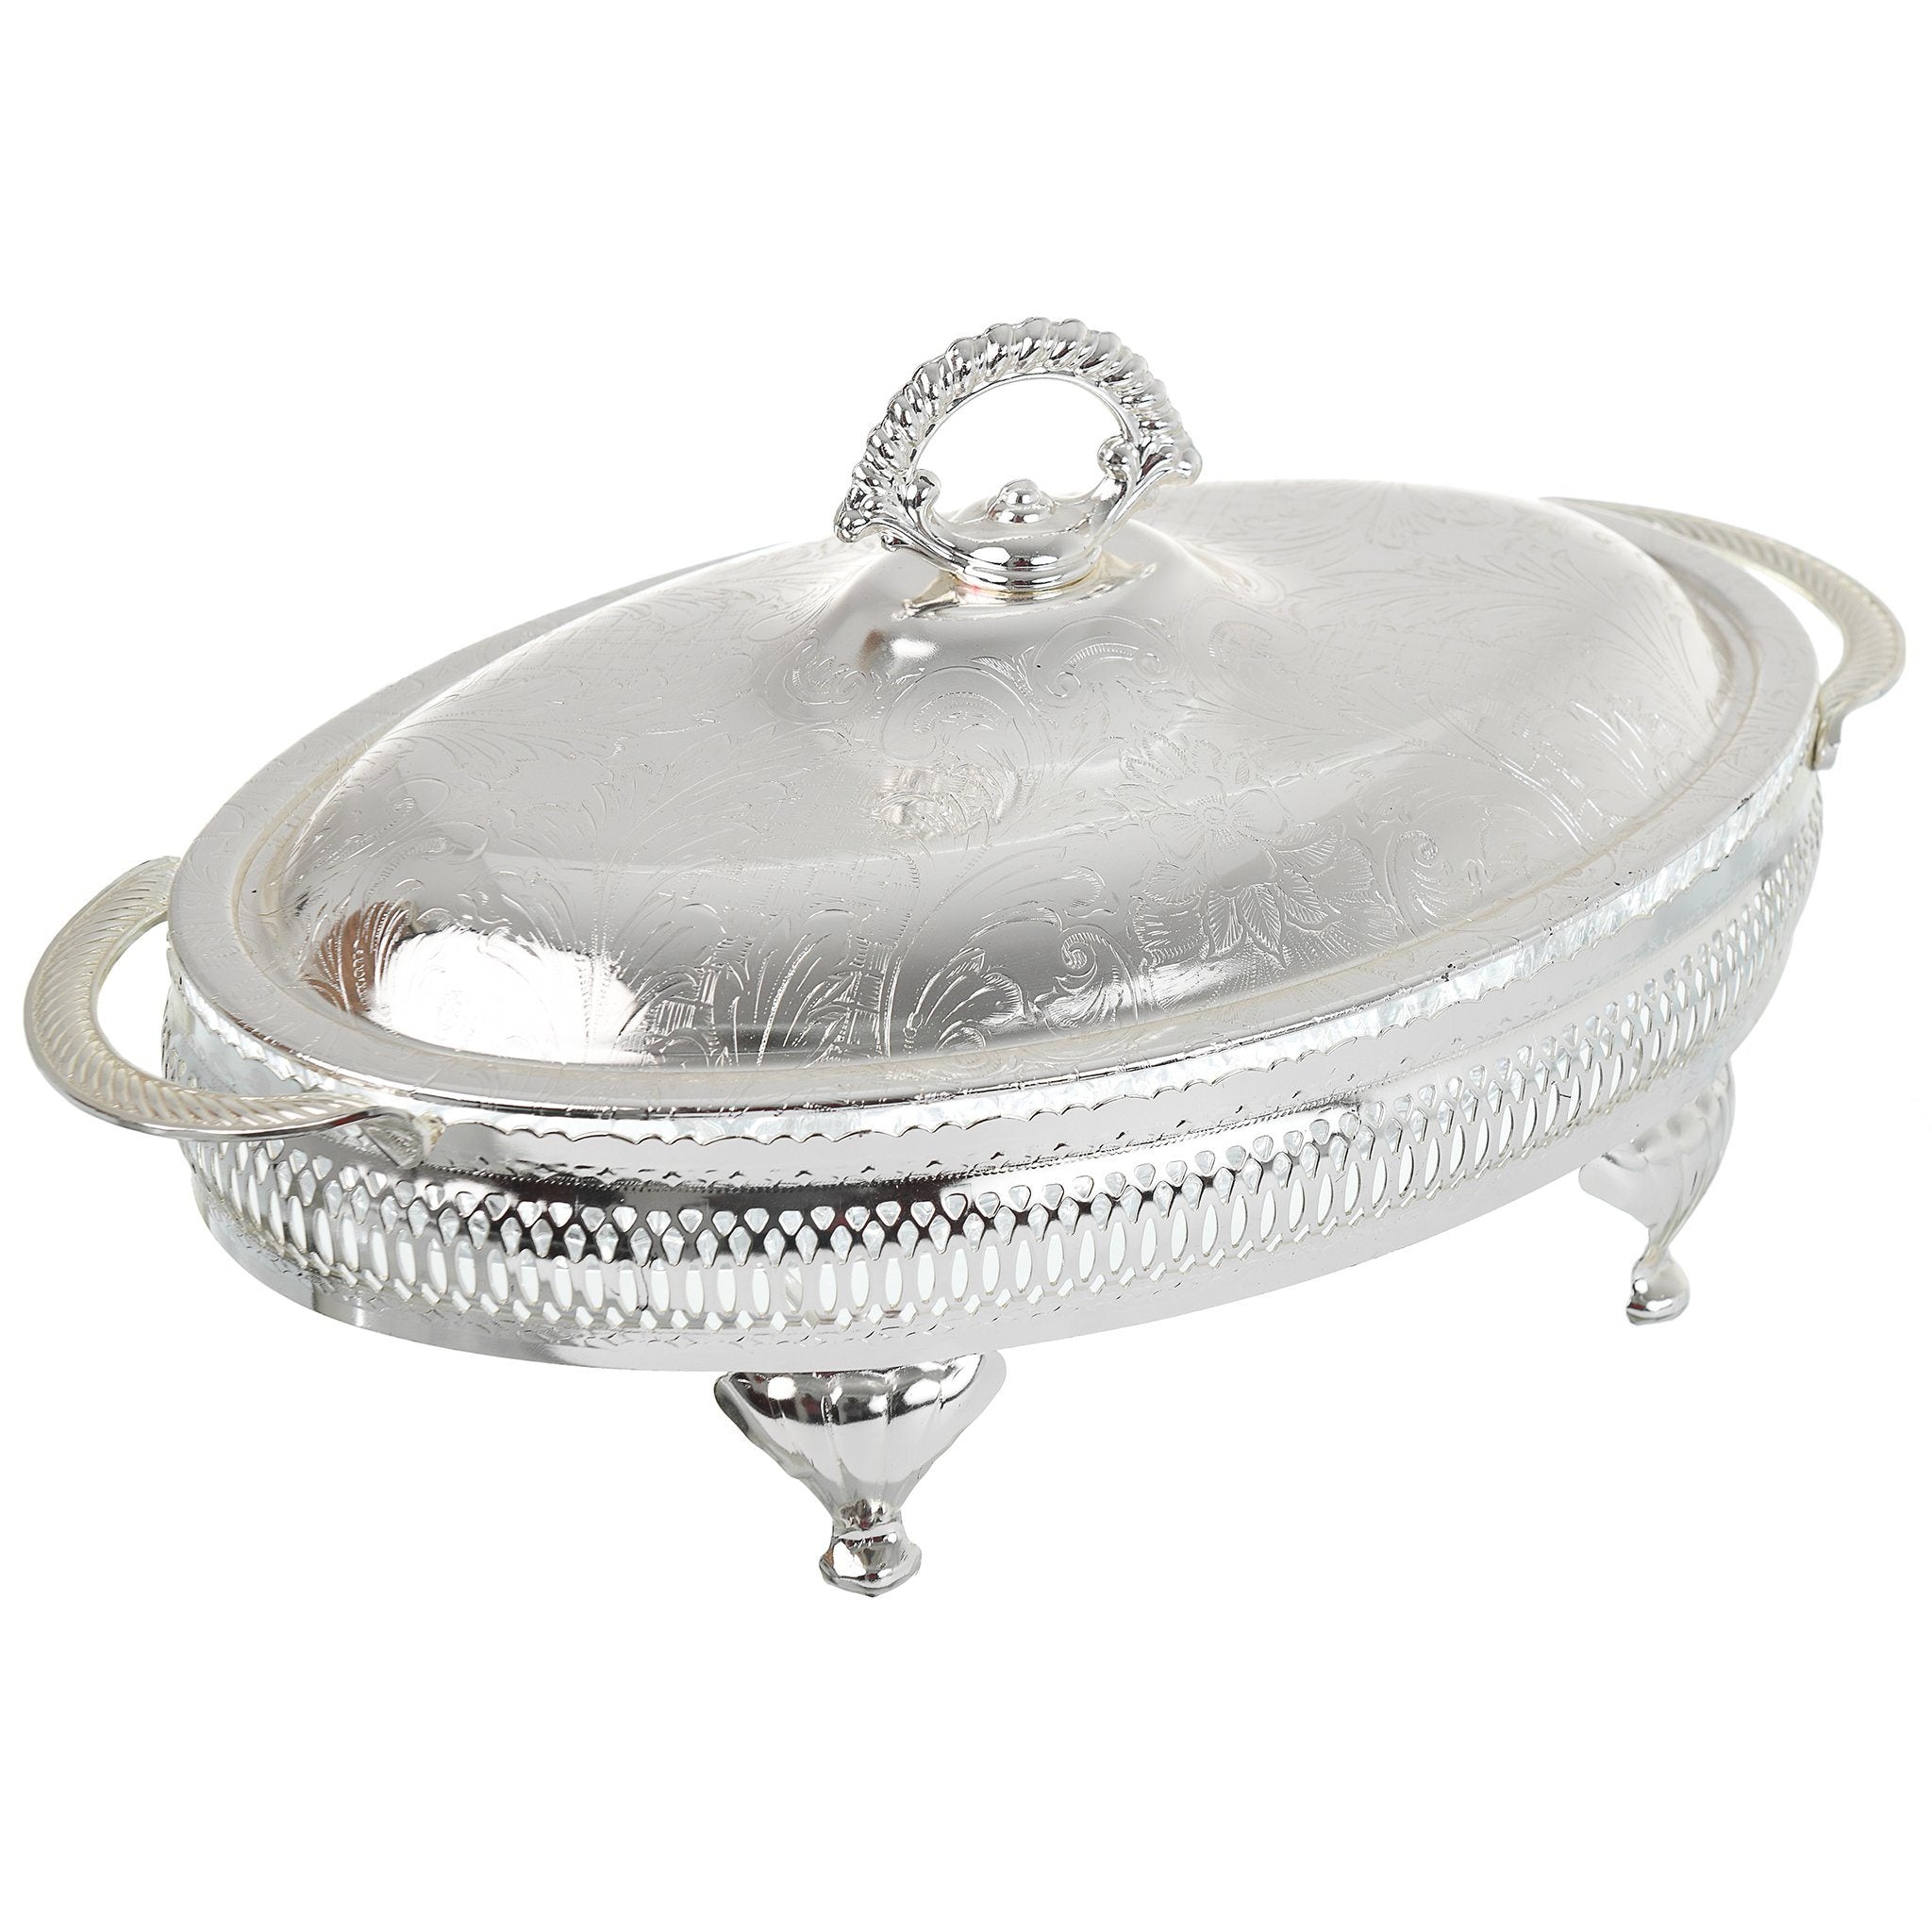 Queen Anne - Oval Hors d'oeuvre 4 Parts with Silver Plated Cover - Silver Plated Metal & Glass - 33x20cm - 26000417